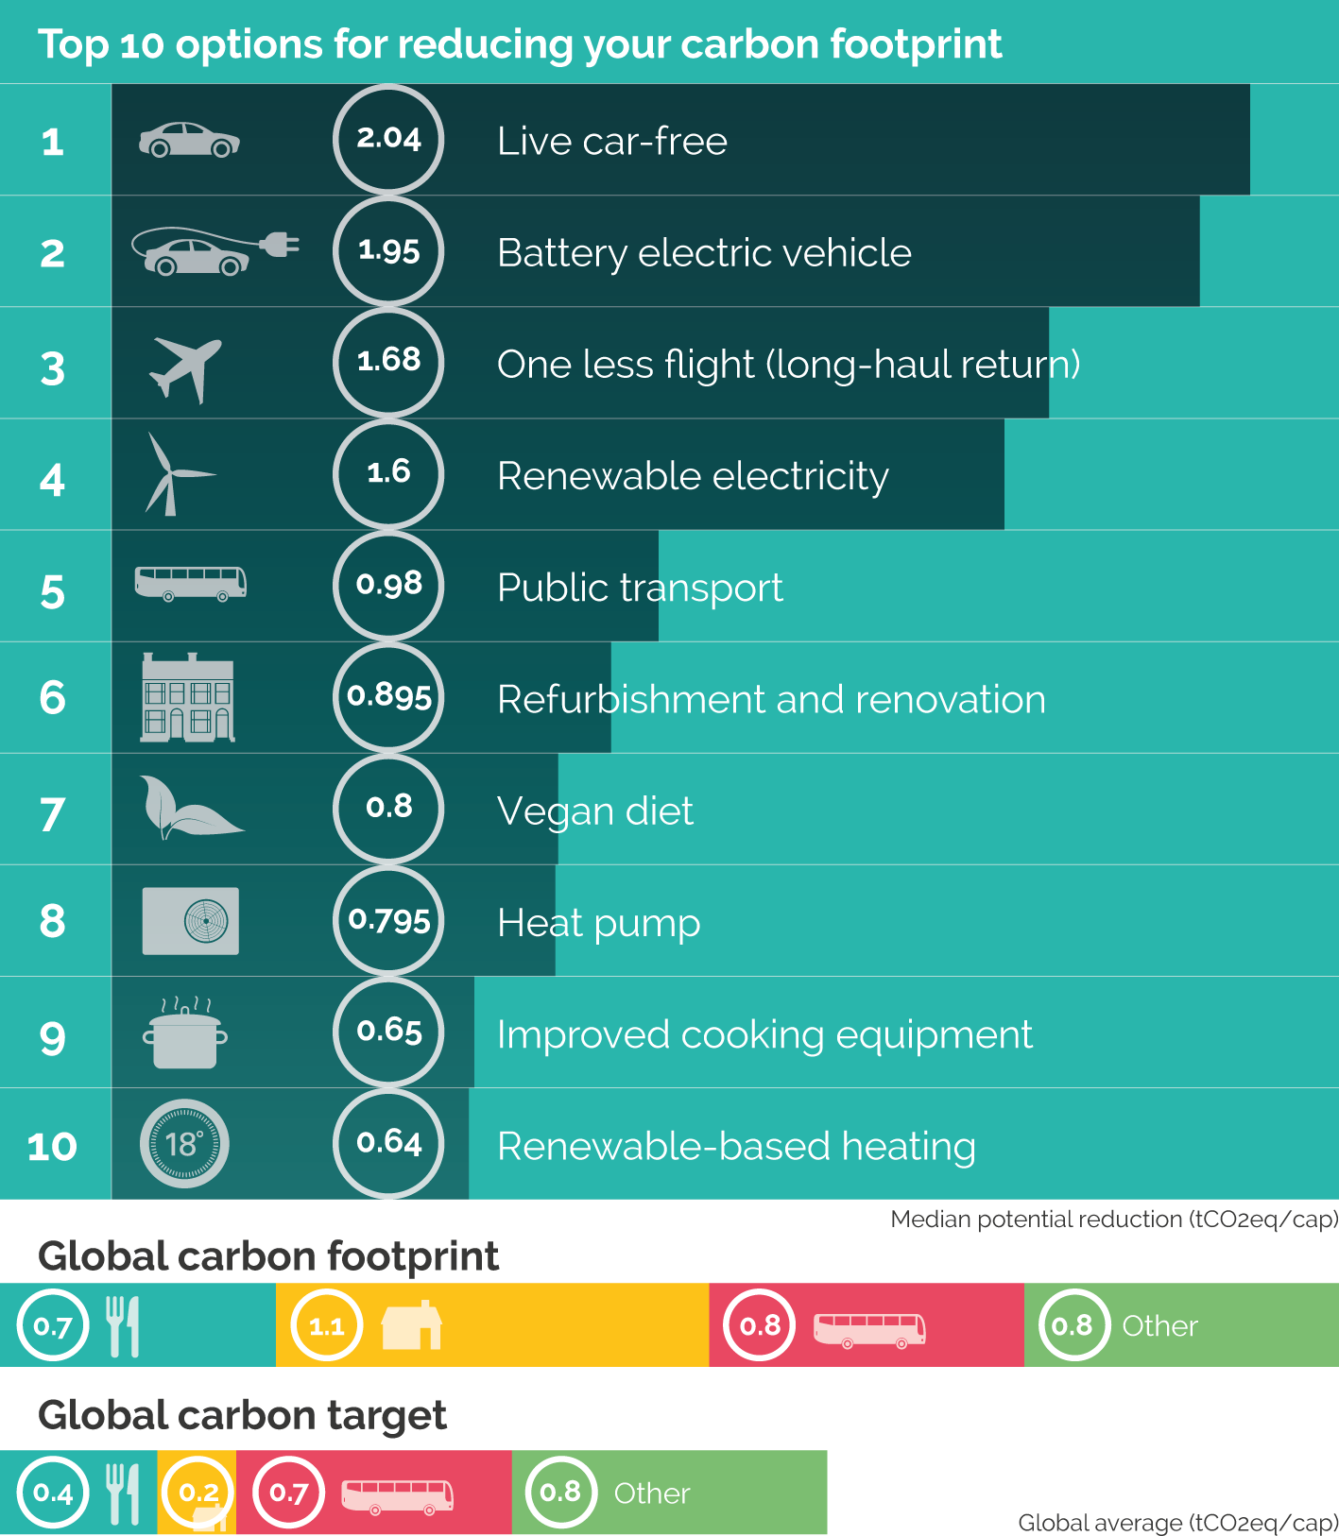 A graph showing the most viable options for reducing your carbon footprint cover a range of options, from living car-free to installing renewable energy-based heating.